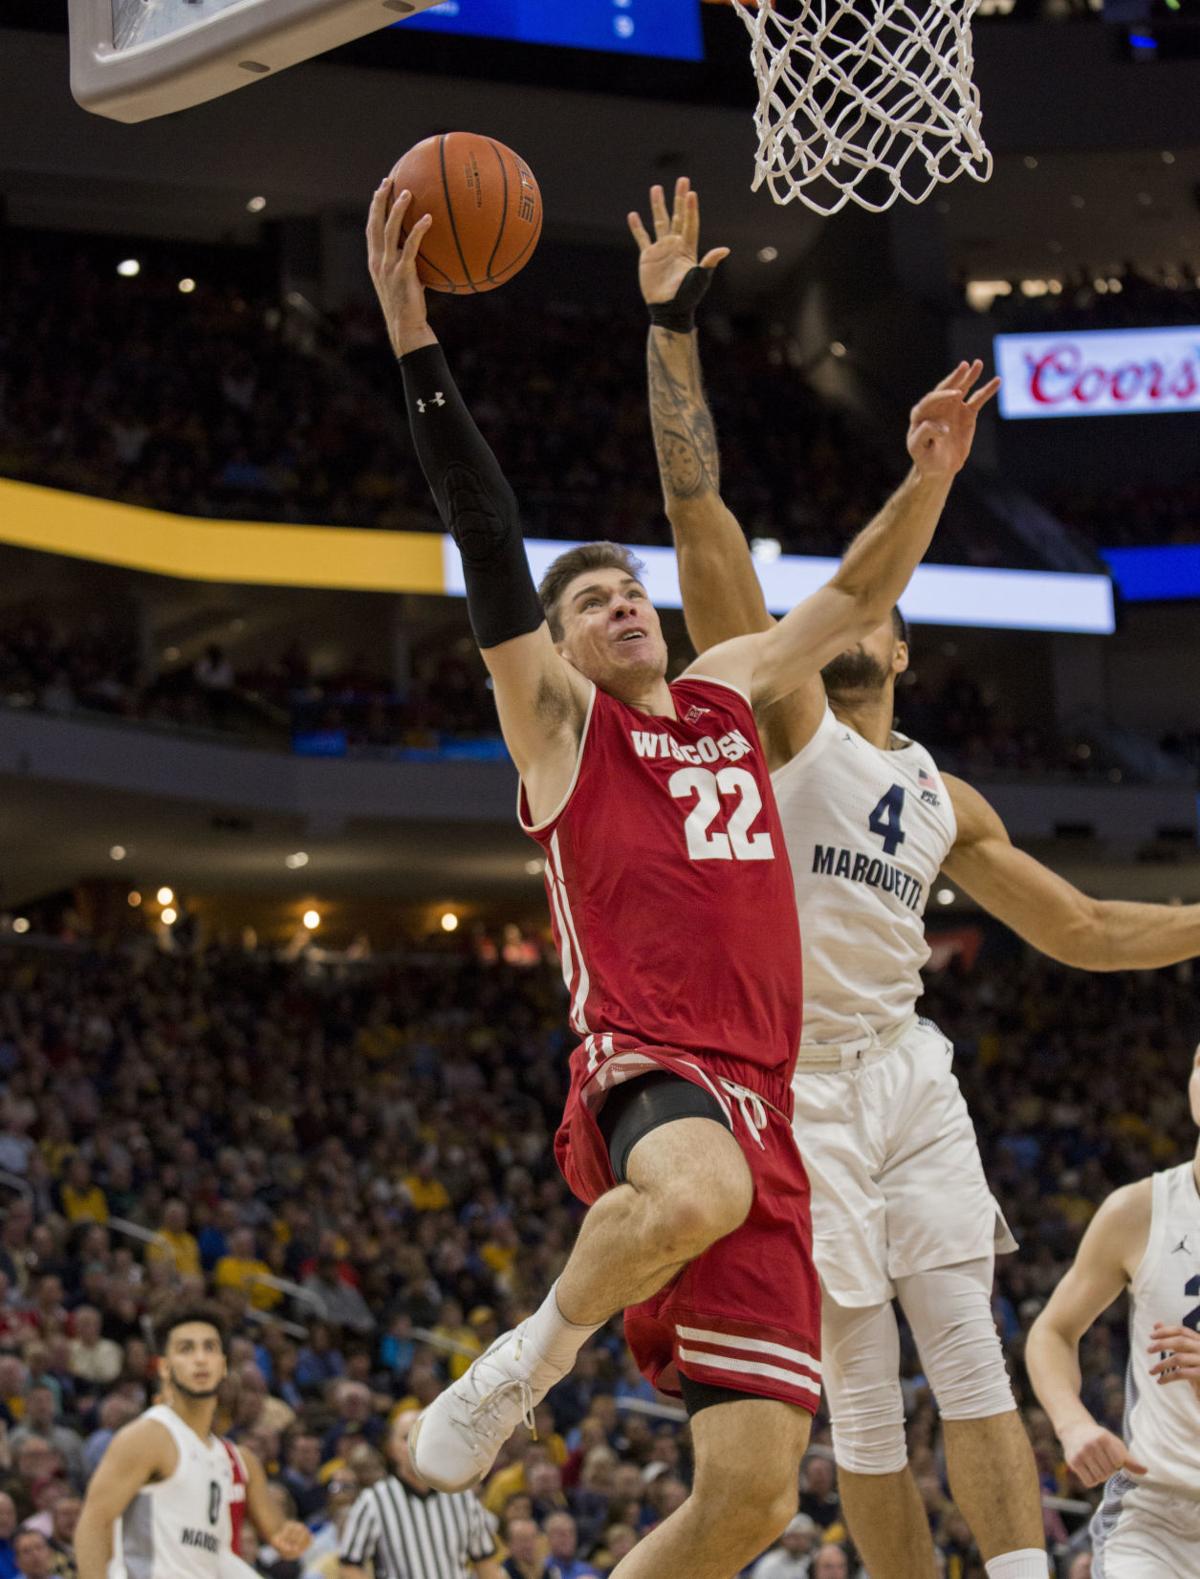 Wisconsin Badgers Basketball Printable Schedule Printable World Holiday